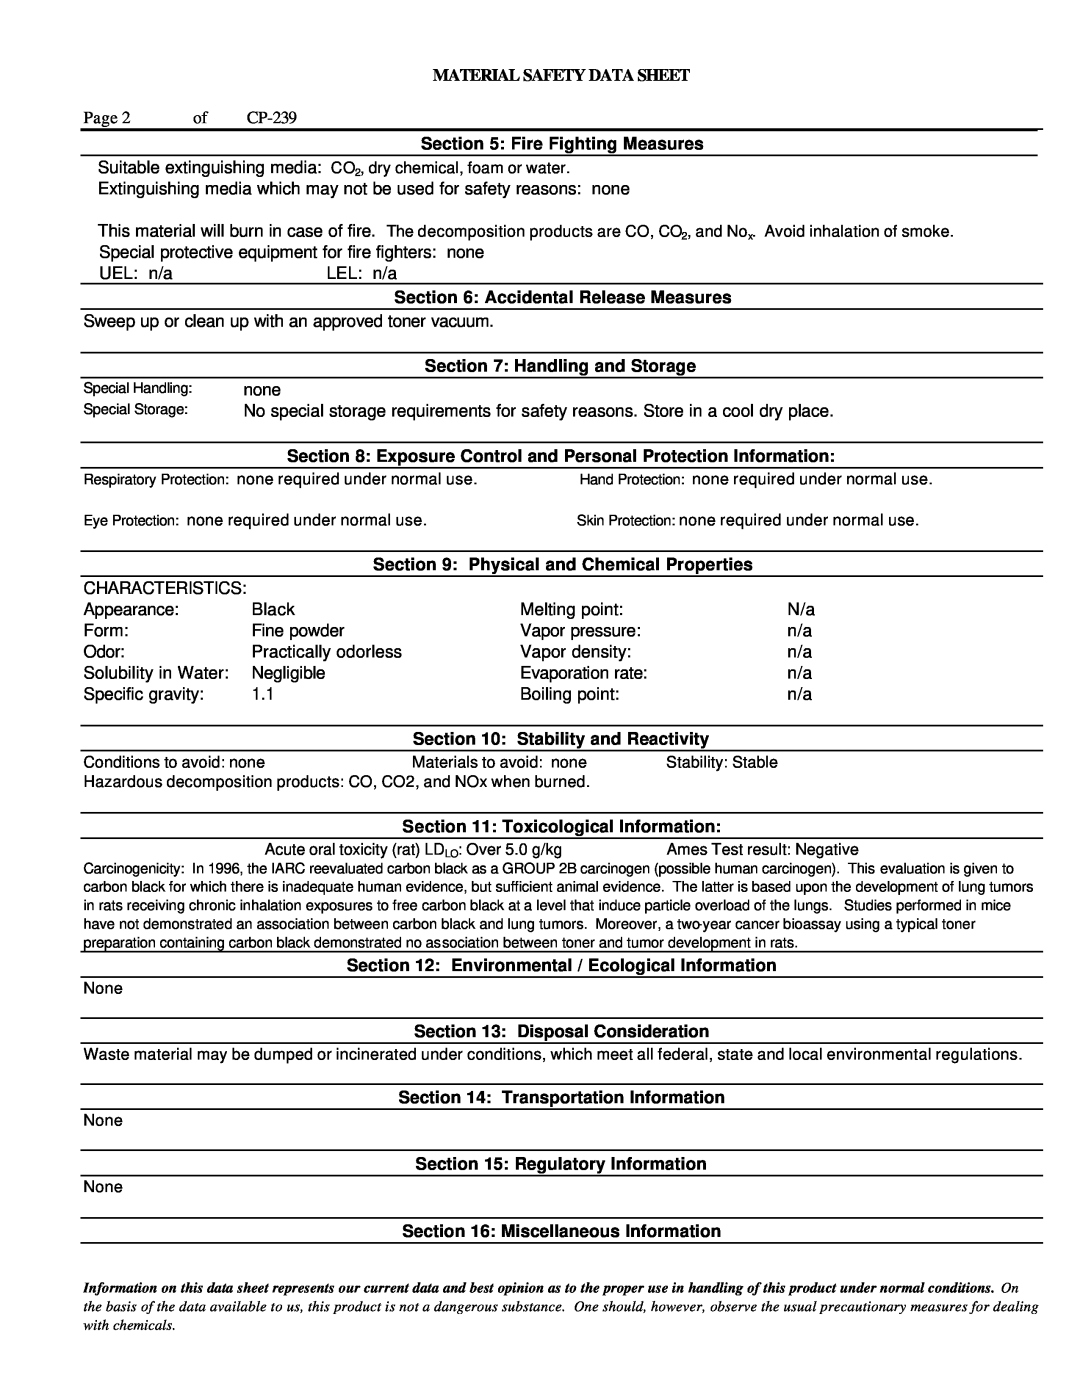 Lanier T 6055 manual Material Safety Data Sheet, Fire Fighting Measures 